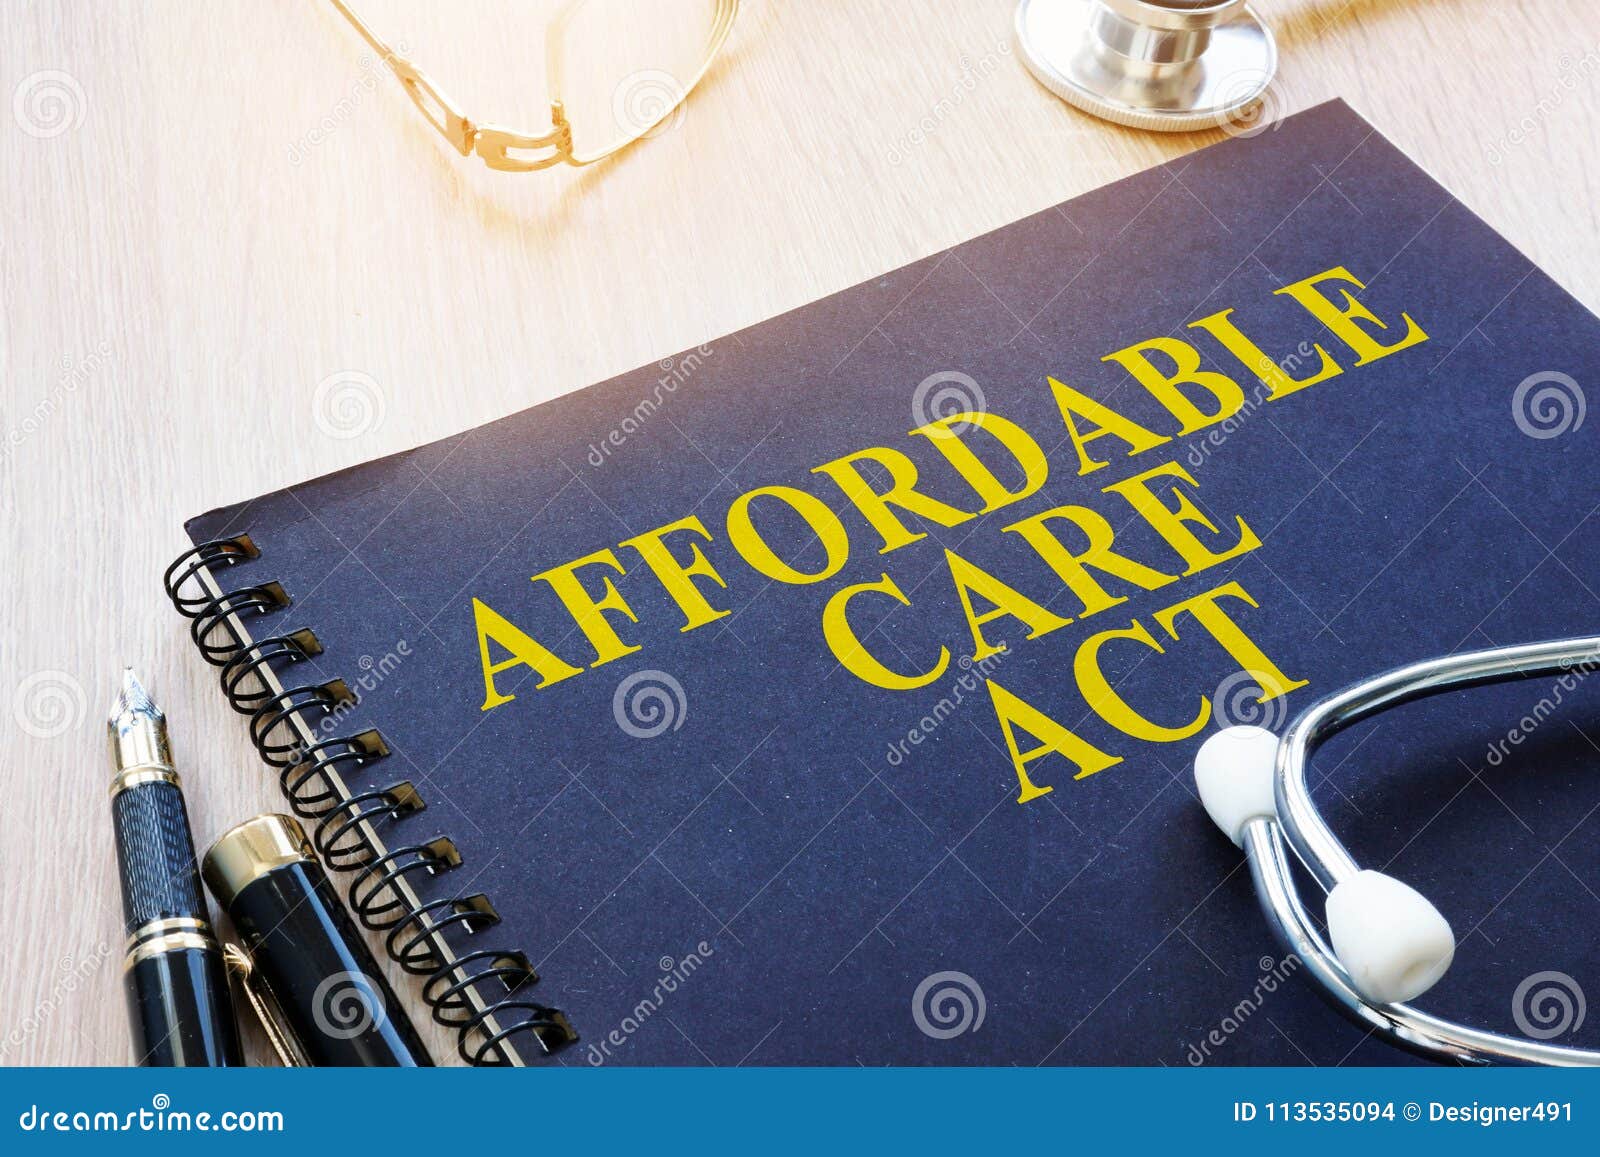 affordable care act aca on a table.